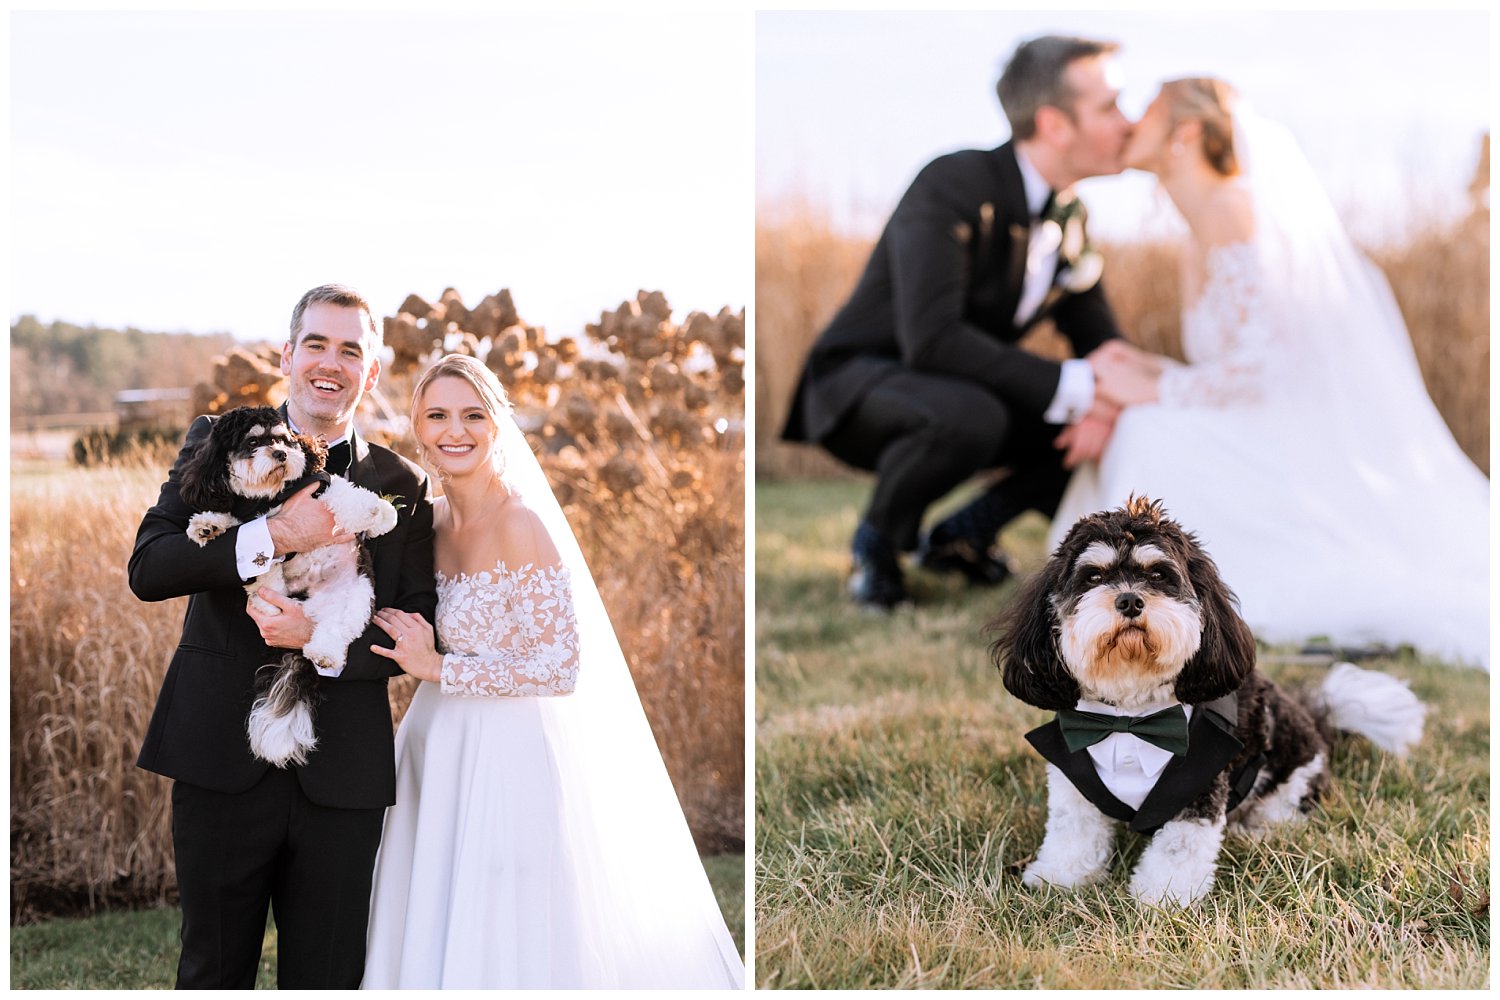 Bride and Groom portraits with their dog at Early Mountain Vineyard in Charlottesville, Virginia